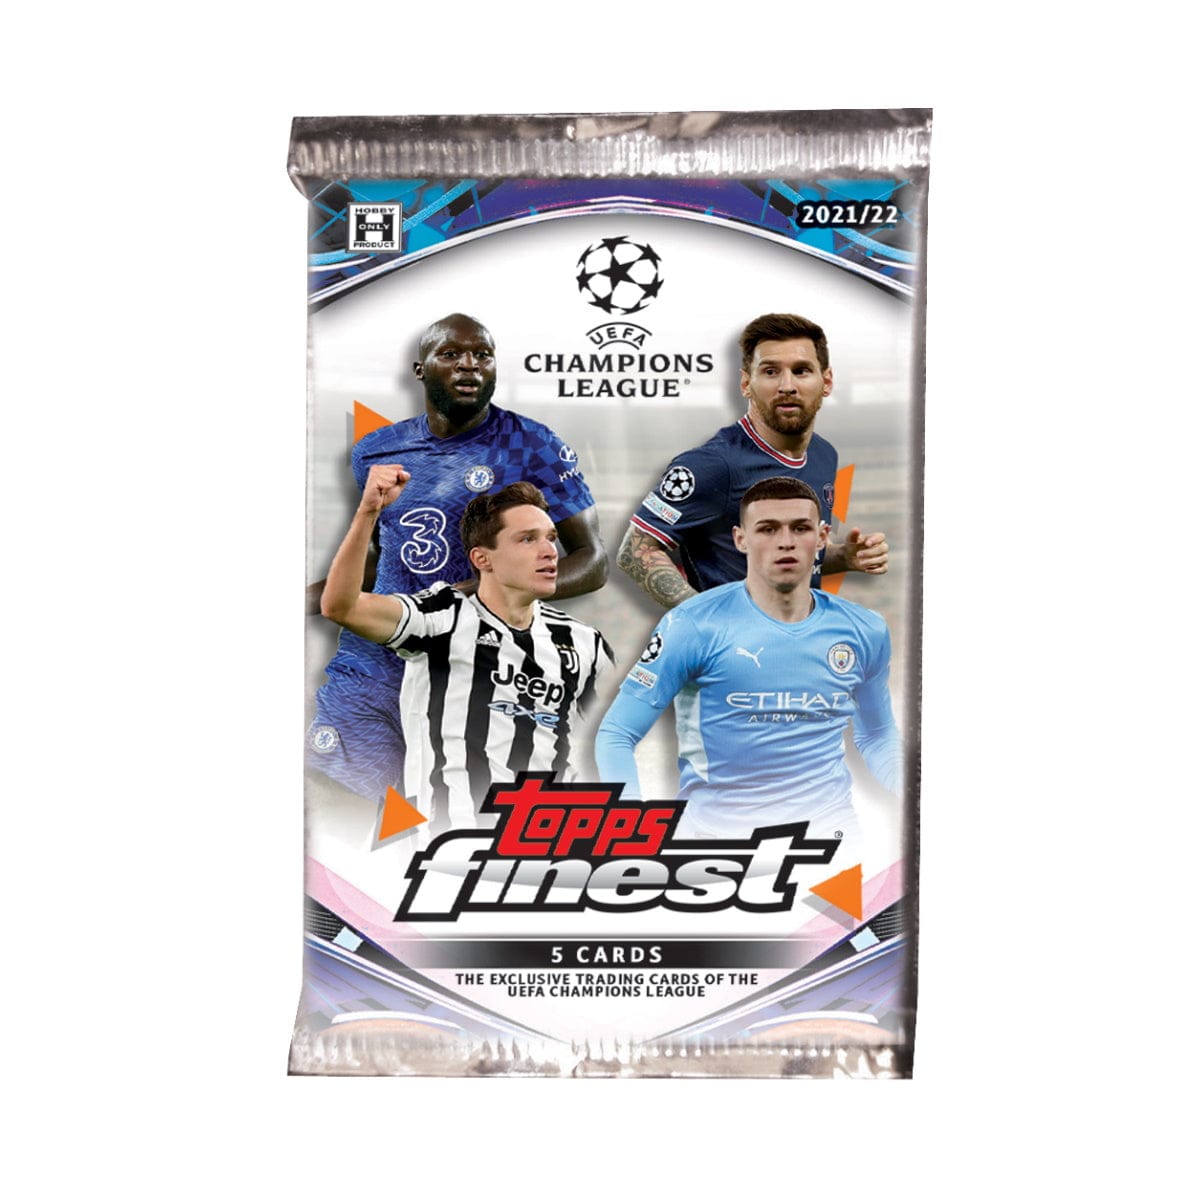 2021-22 TOPPS FINEST UEFA CHAMPIONS LEAGUE CARDS - MASTER BOX (2 AUTOGRAPHS)